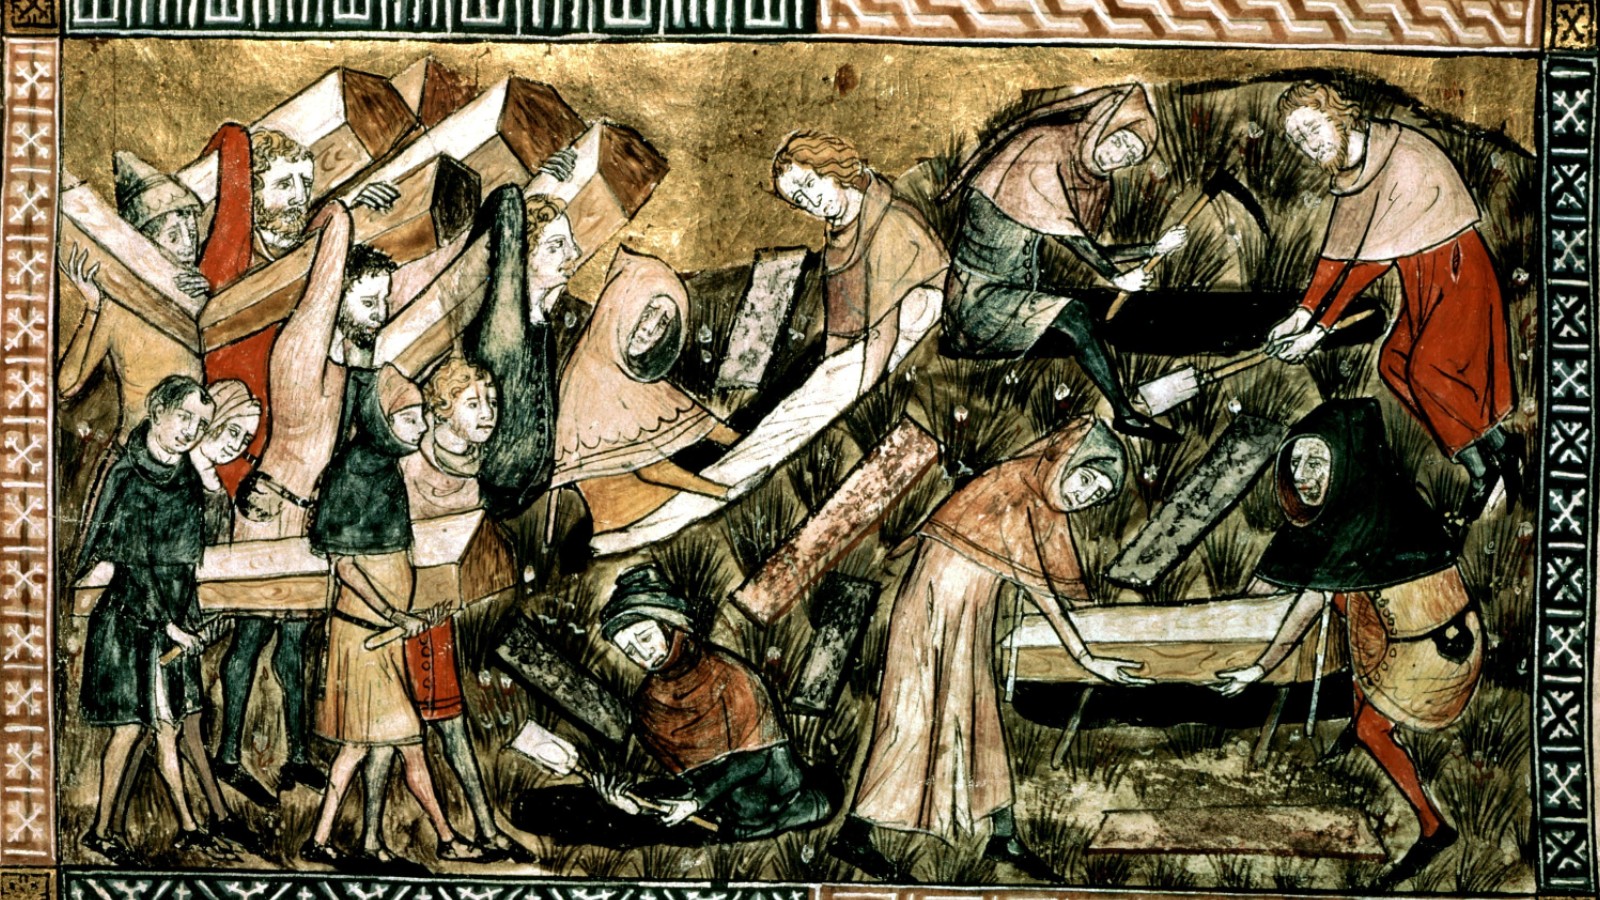 Plague victims are buried at Tournai in what is now Belgium, c.1349